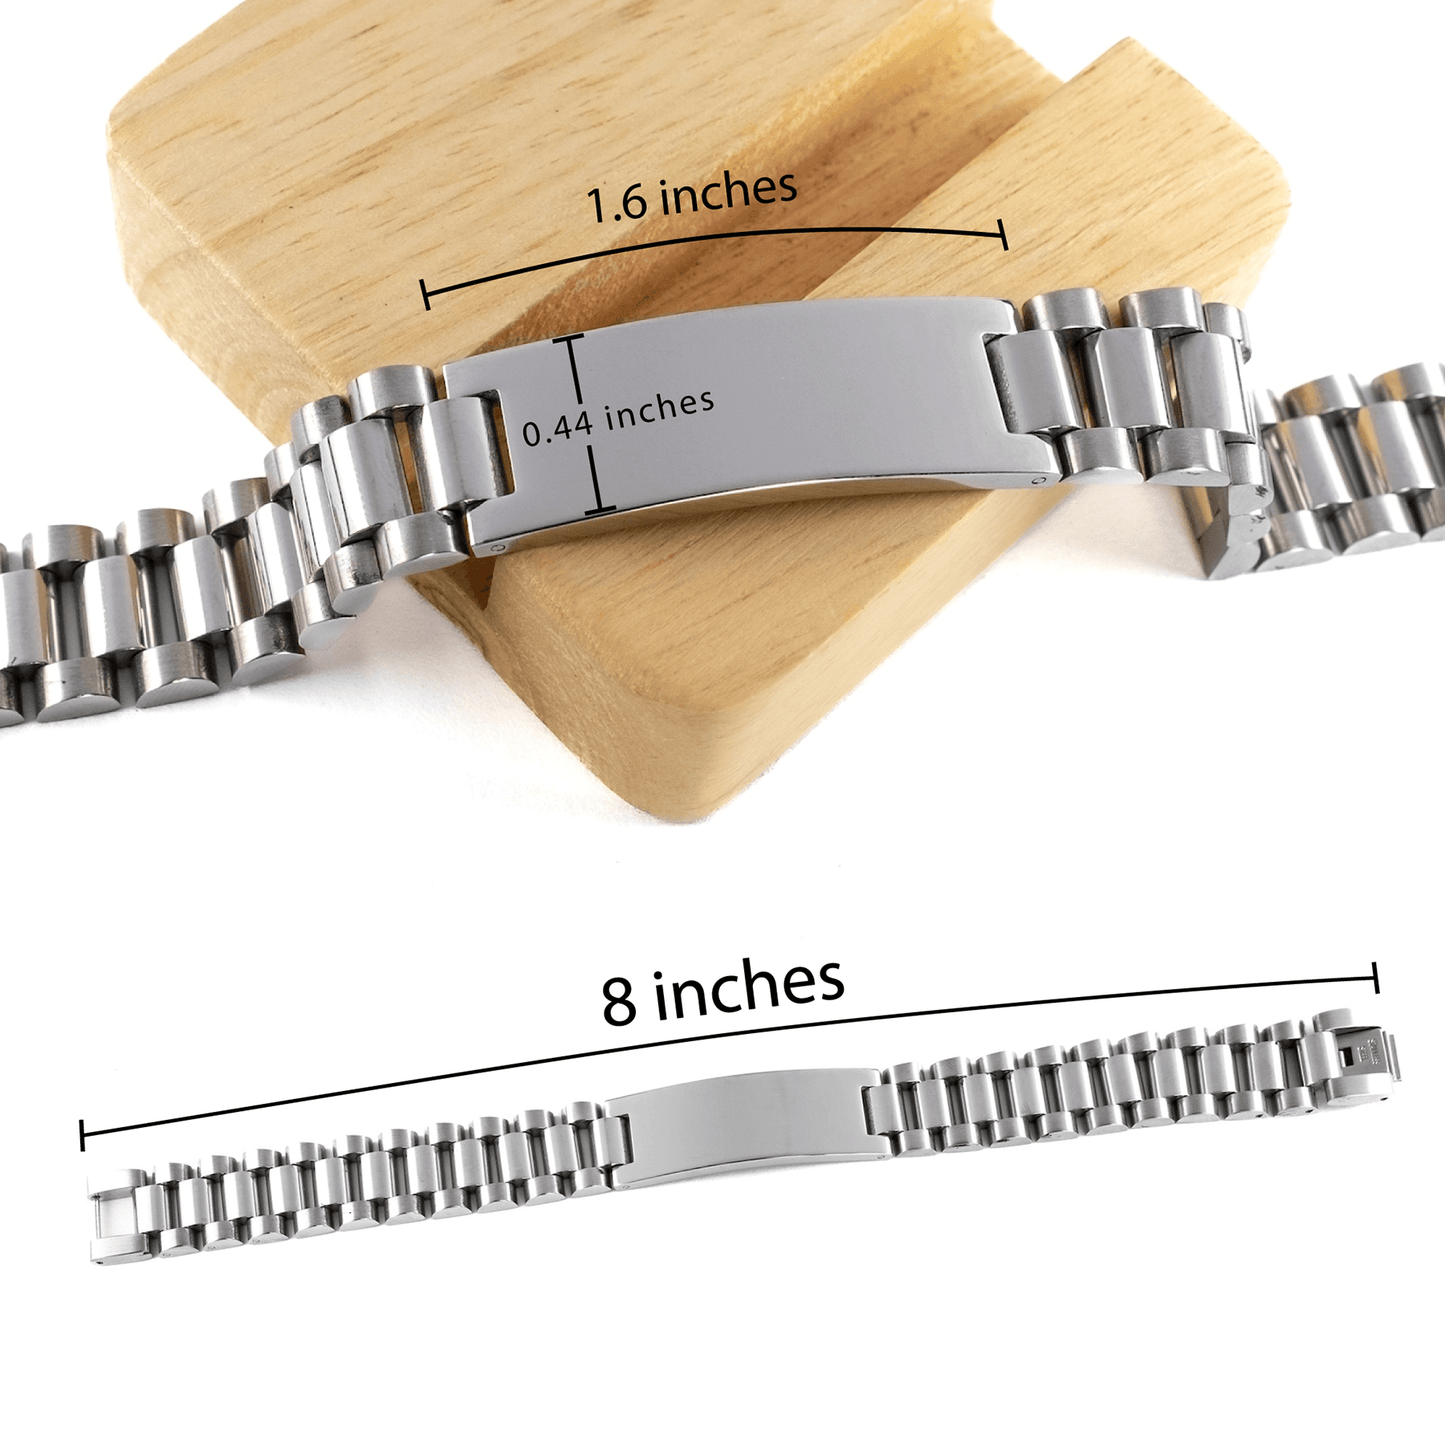 Remarkable Insurance Sales Agent Gifts, Your dedication and hard work, Inspirational Birthday Christmas Unique Ladder Stainless Steel Bracelet For Insurance Sales Agent, Coworkers, Men, Women, Friends - Mallard Moon Gift Shop